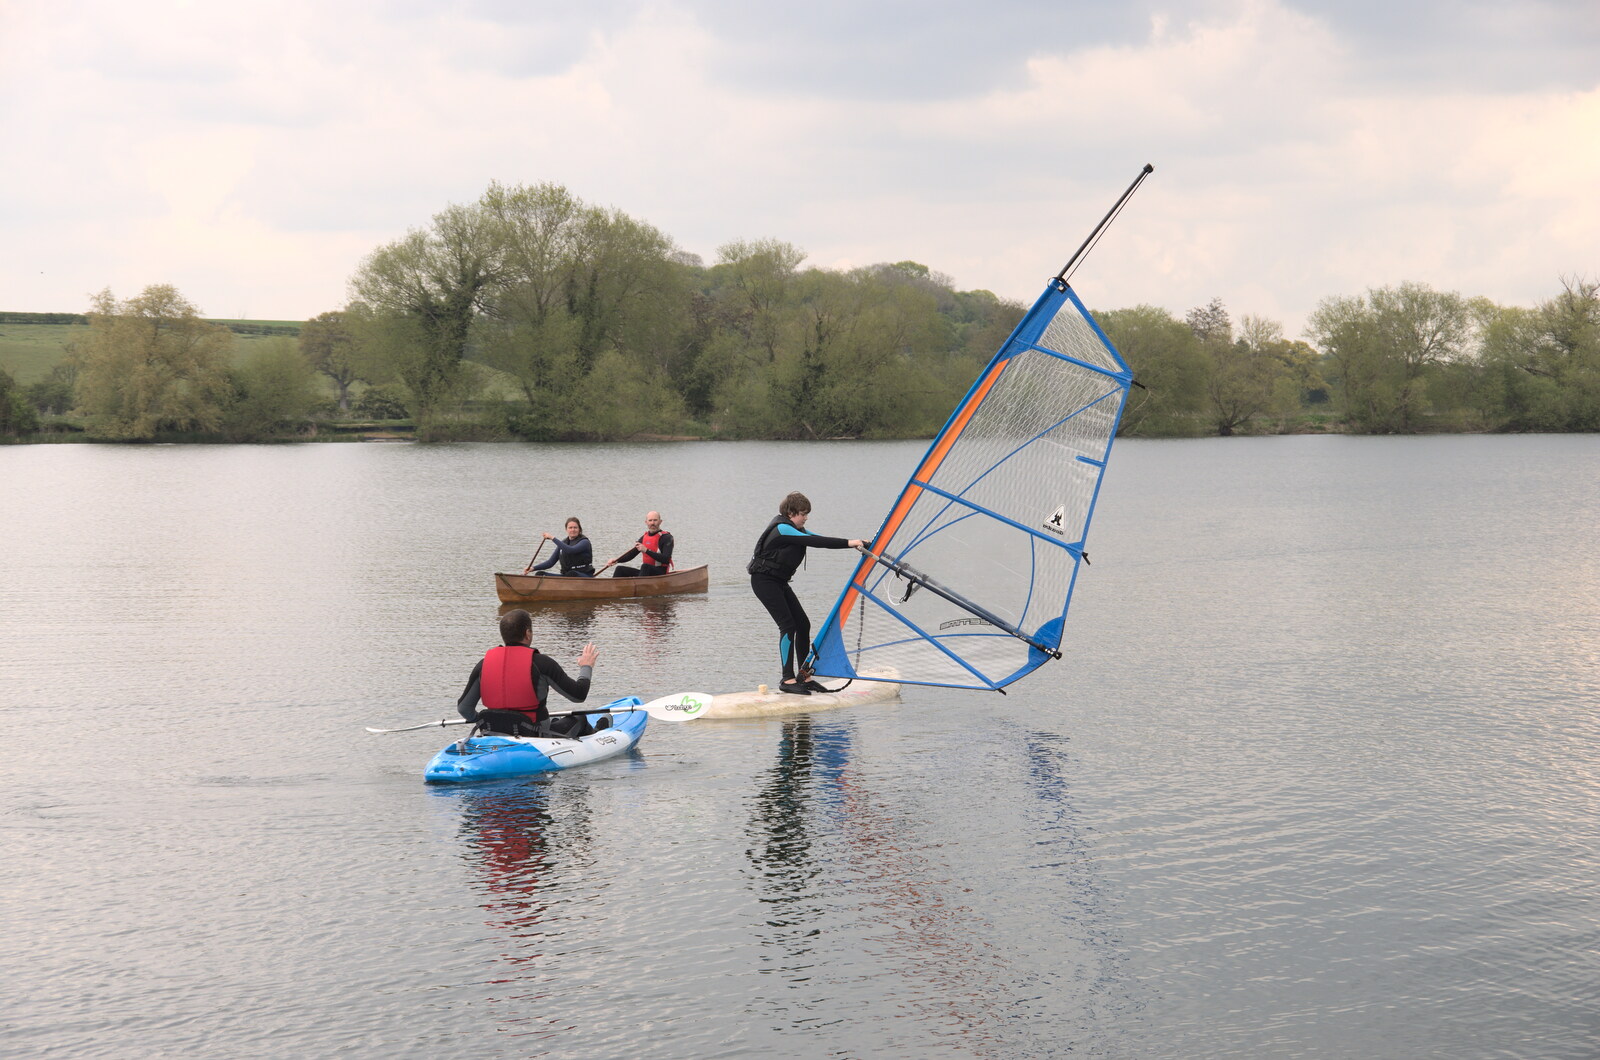 The Canoe's First Outing, Weybread Lake, Harleston - 1st May 2022: Fred gets a windsurfing lesson